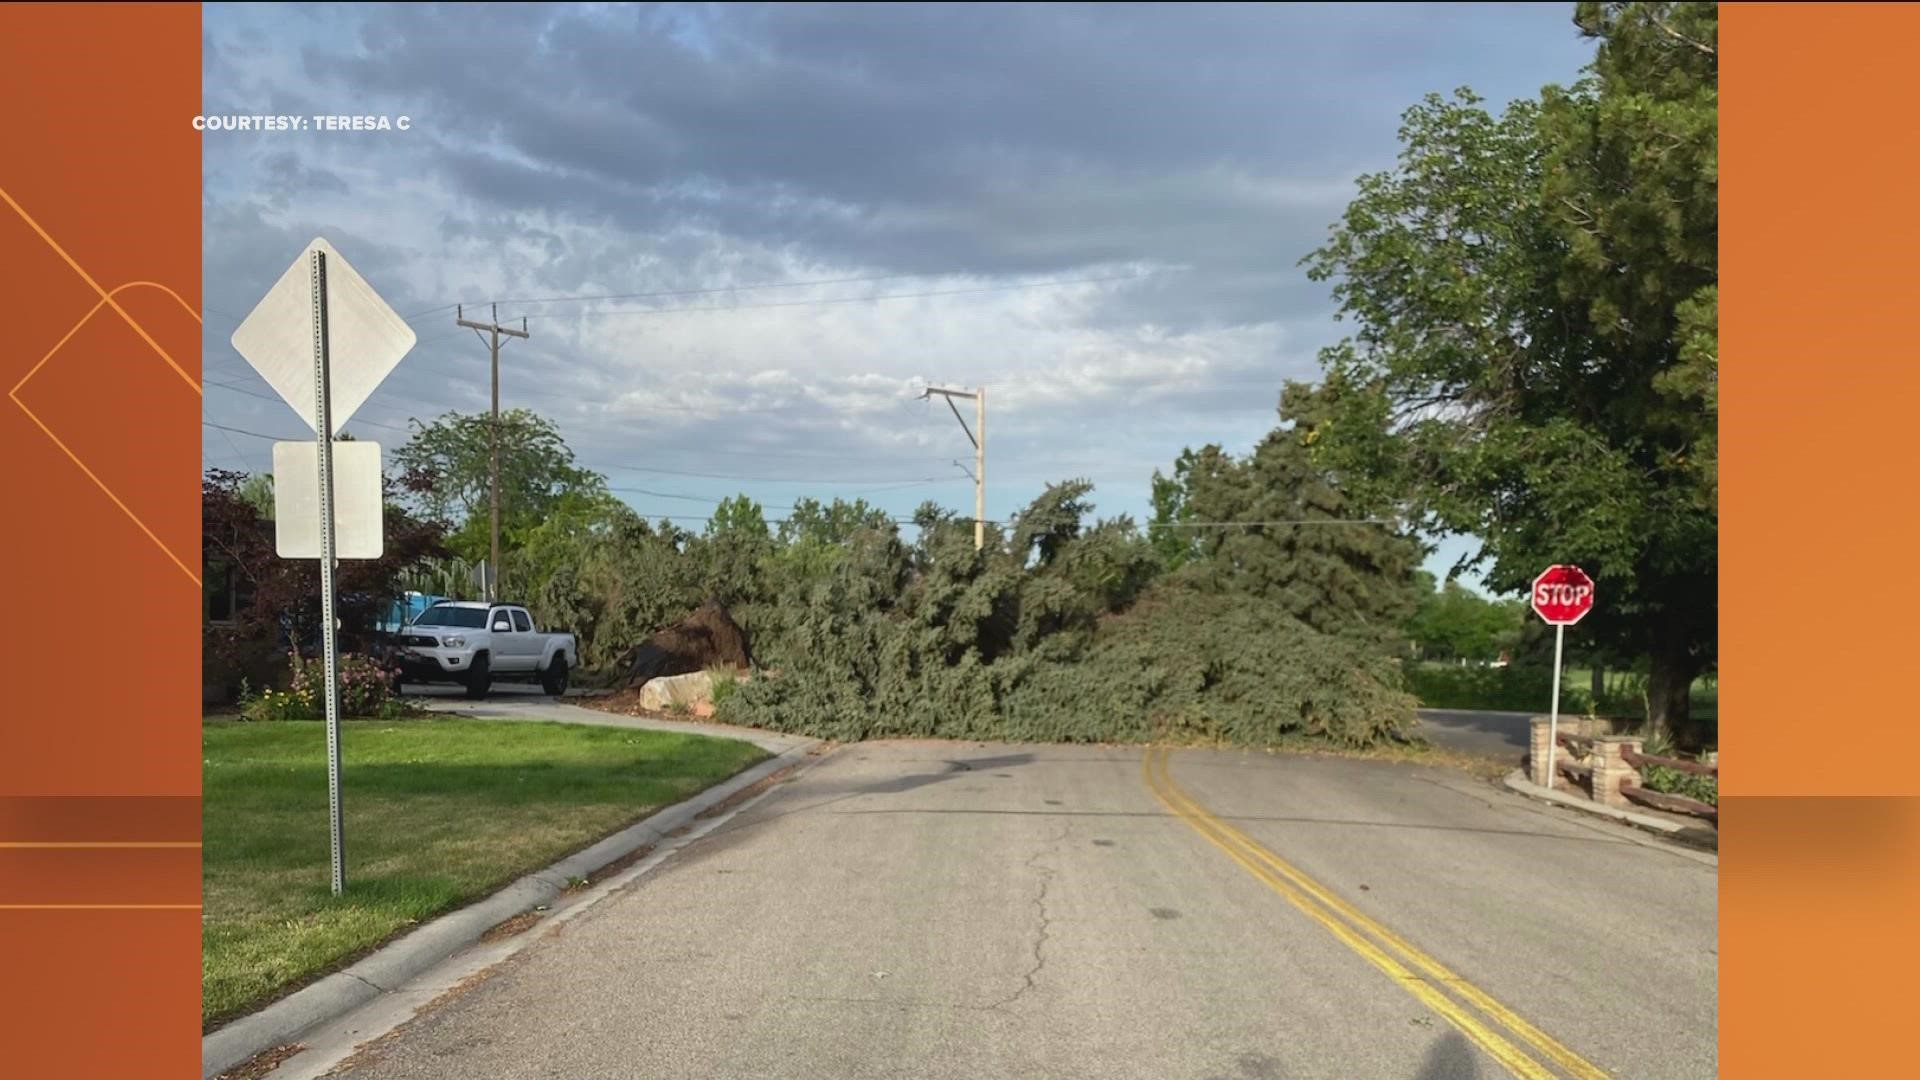 Boise National Weather Service said wind speeds over the Boise Airport and the Boise Bench were up to 70 miles per hour last night around 1 a.m.